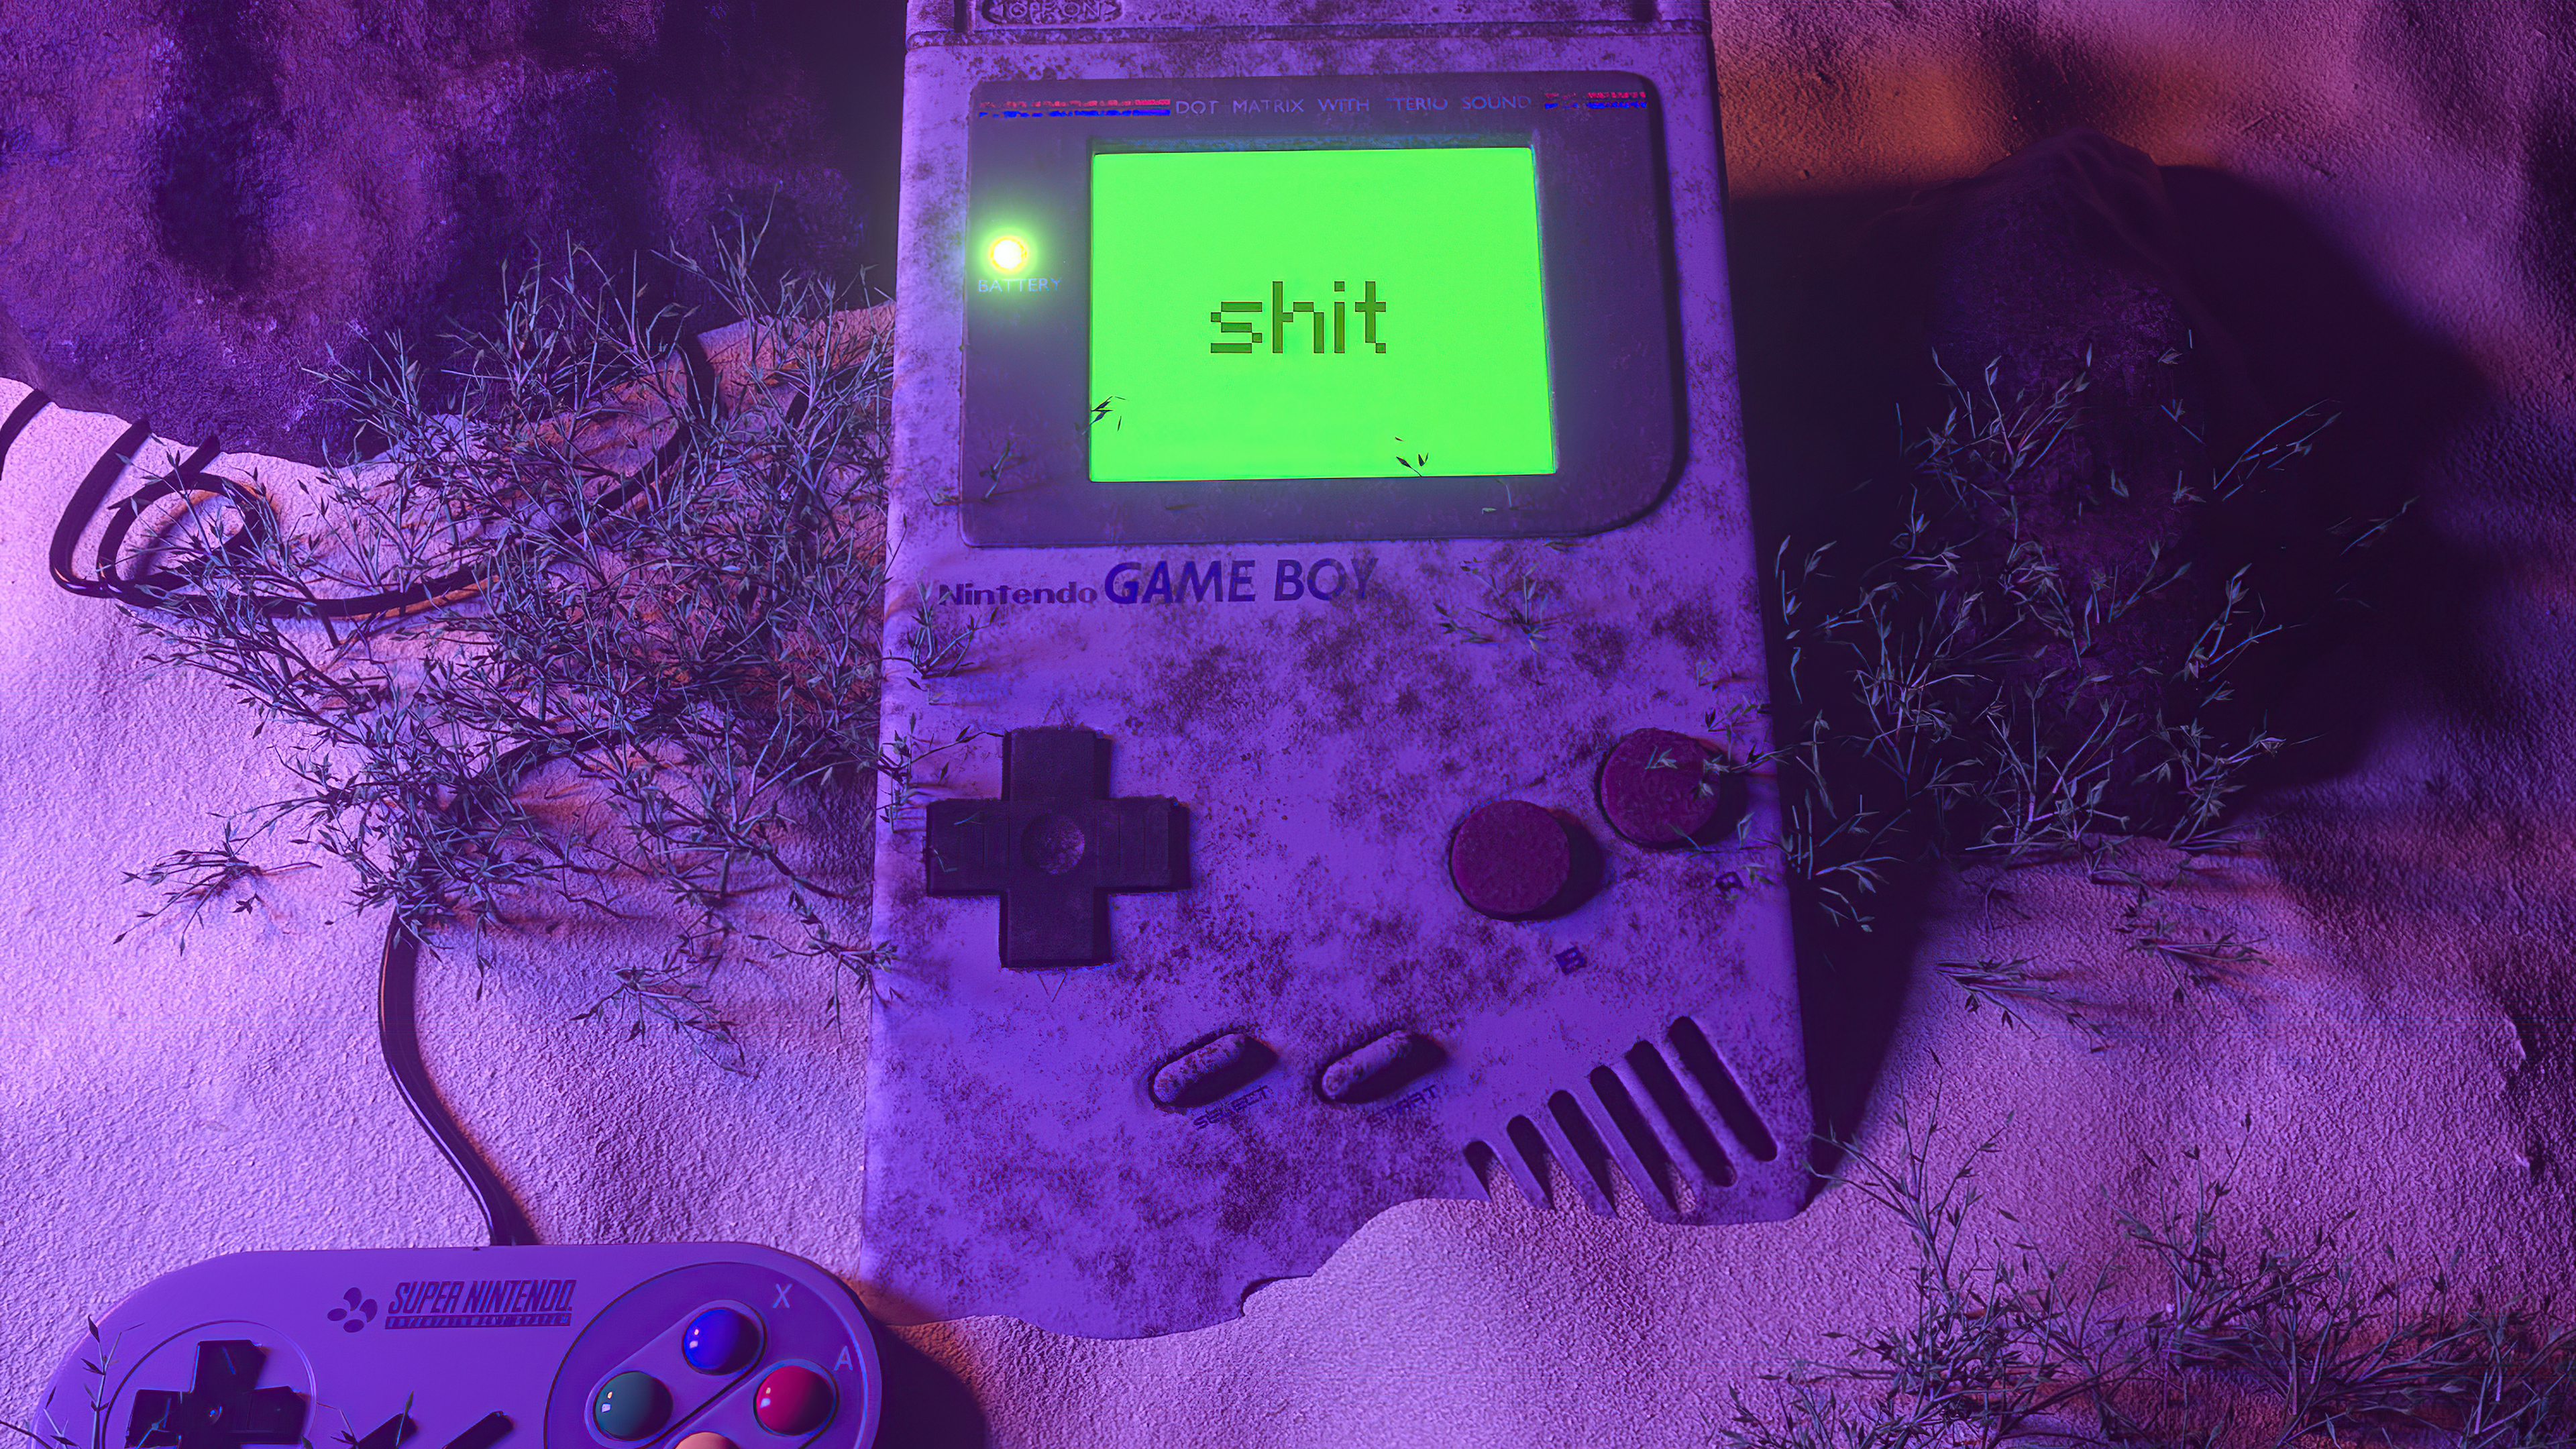 Gameboy A E S T H E T I C Wallpaper by StrongholdTheory on DeviantArt